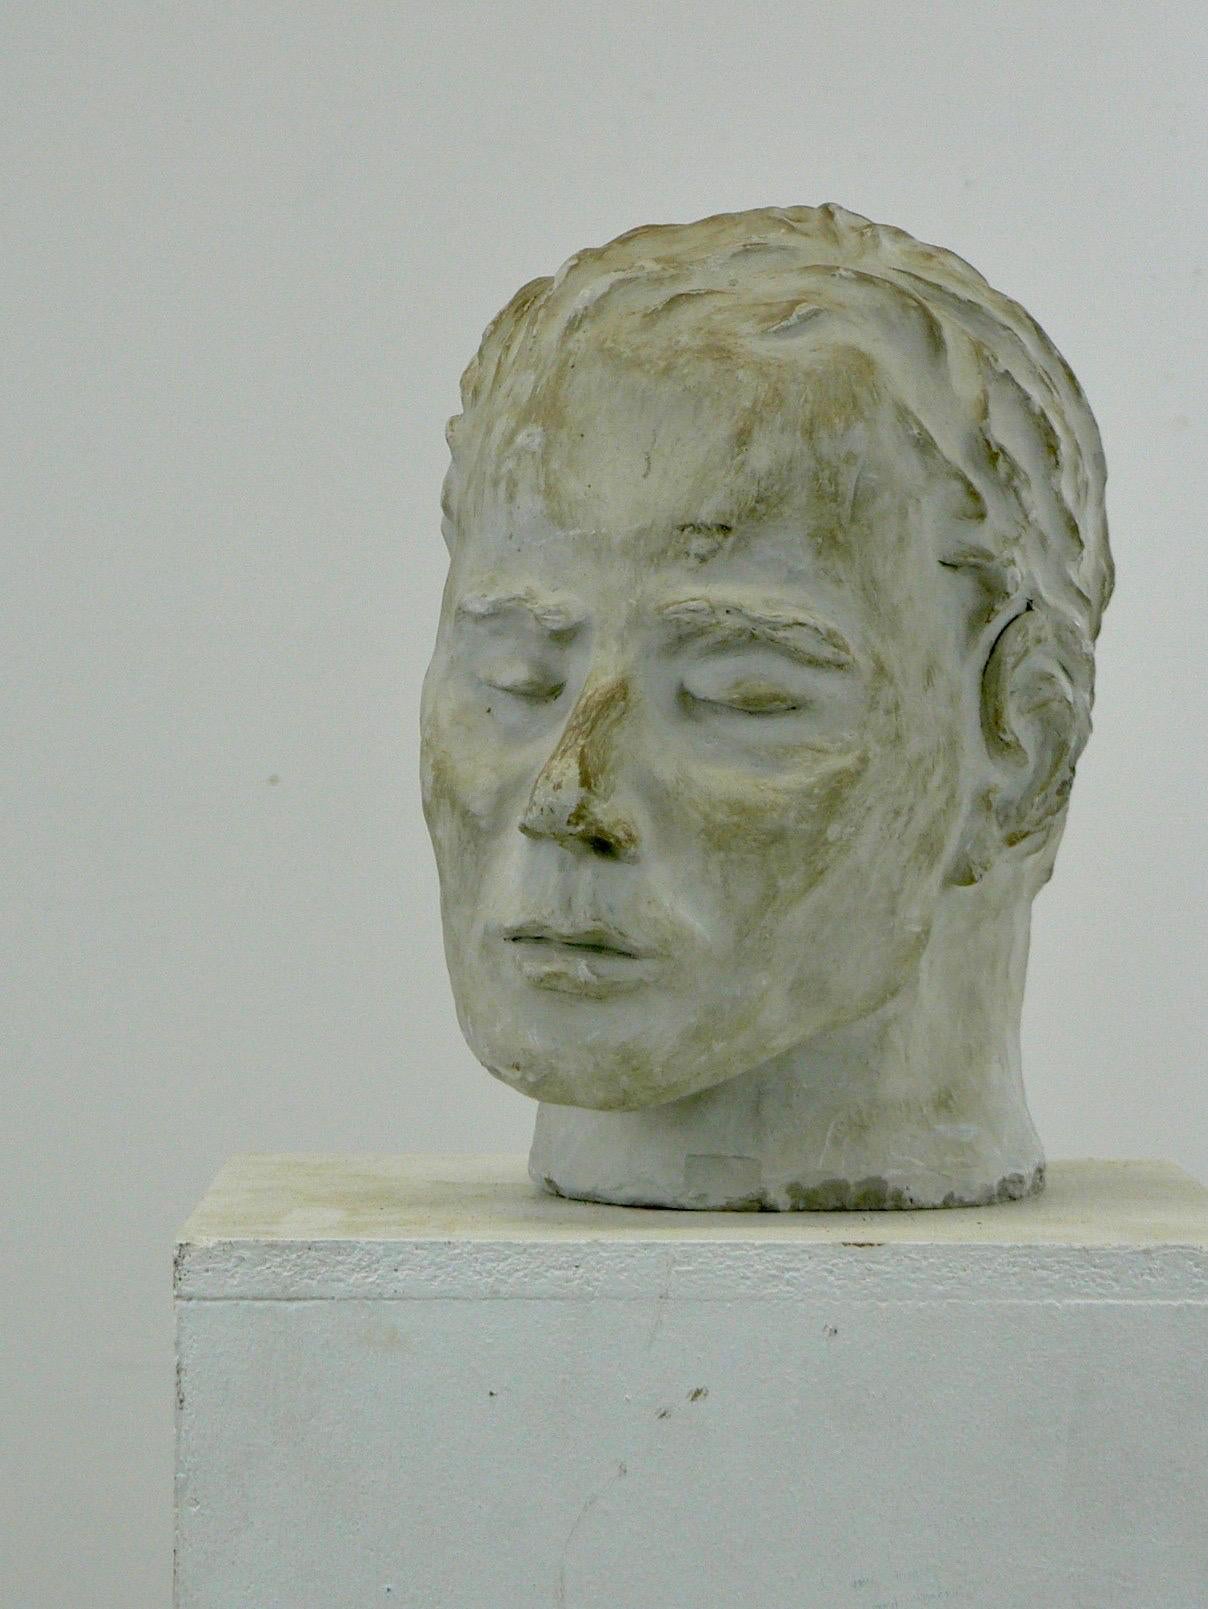 A refined plaster sculpture depicting a man's head with closed eyes, crafted in France during the 1950s. It features a magnificent patina, adding to its allure and sophistication.

This sculpture originating from the workshop of a French artist from